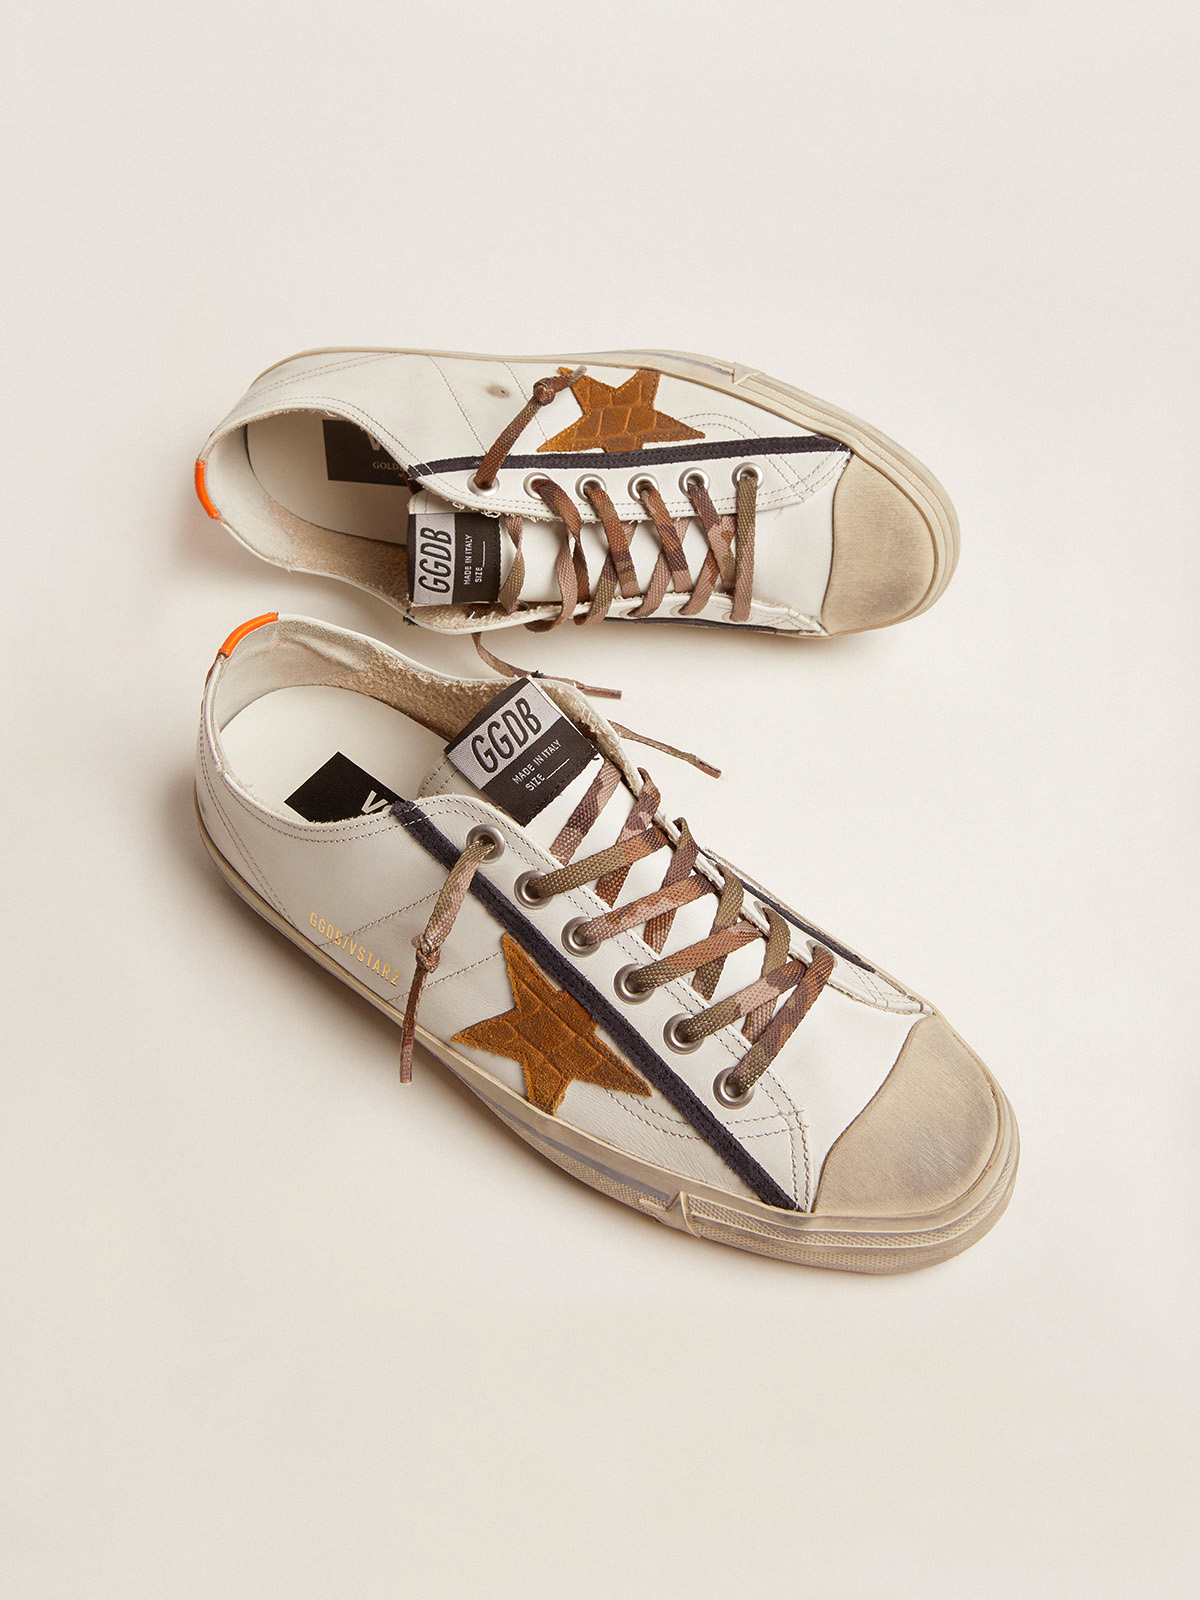 V-Star LTD sneakers in white leather with crocodile-print suede star |  Golden Goose